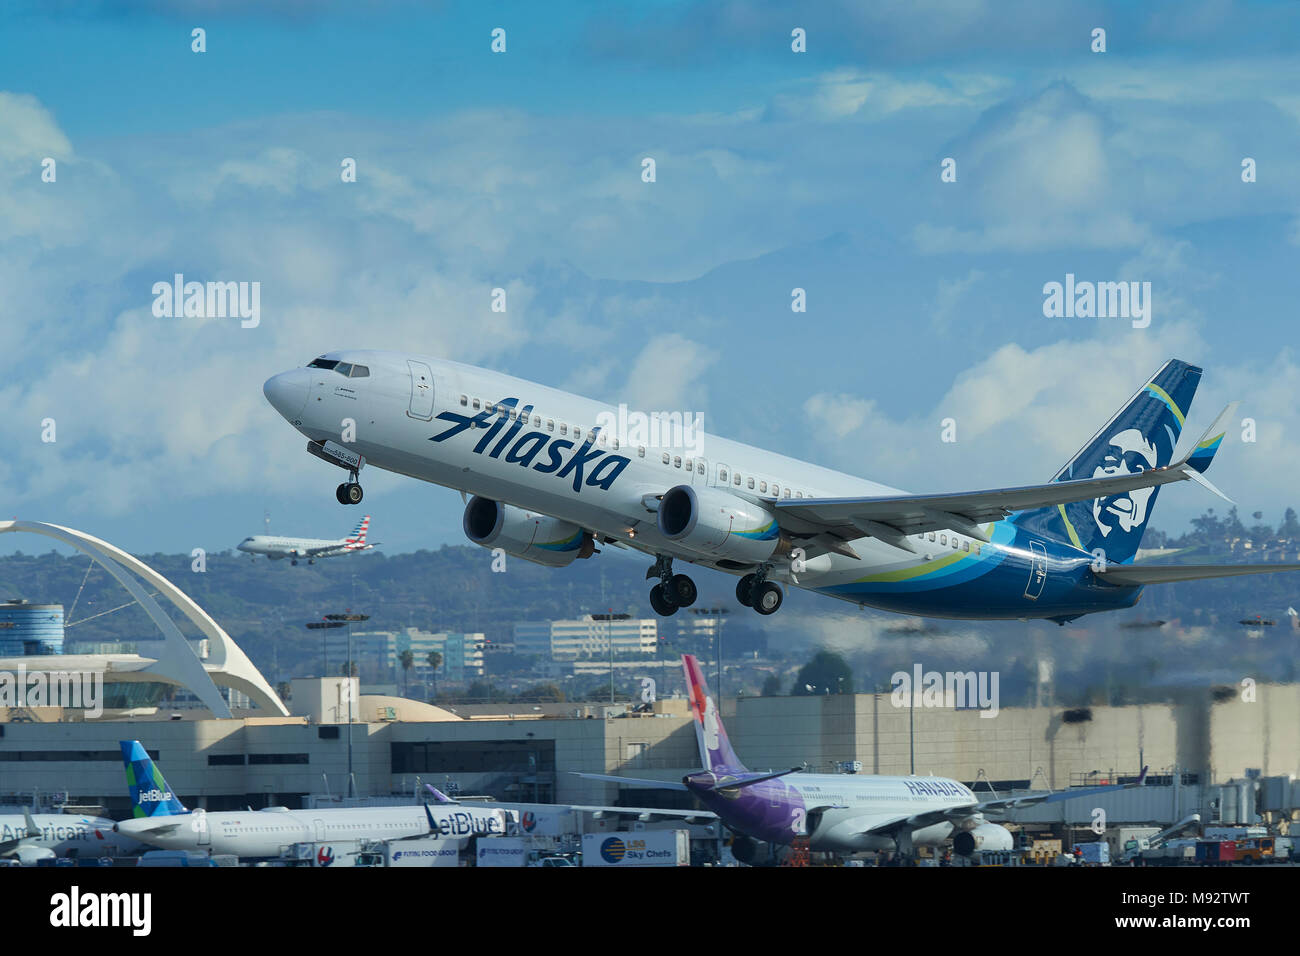 Alaska Airlines Boeing 737-800 Takes Off From Los Angeles International Airport, LAX. A Landing Jet Airliner In The Background. California, USA. Stock Photo